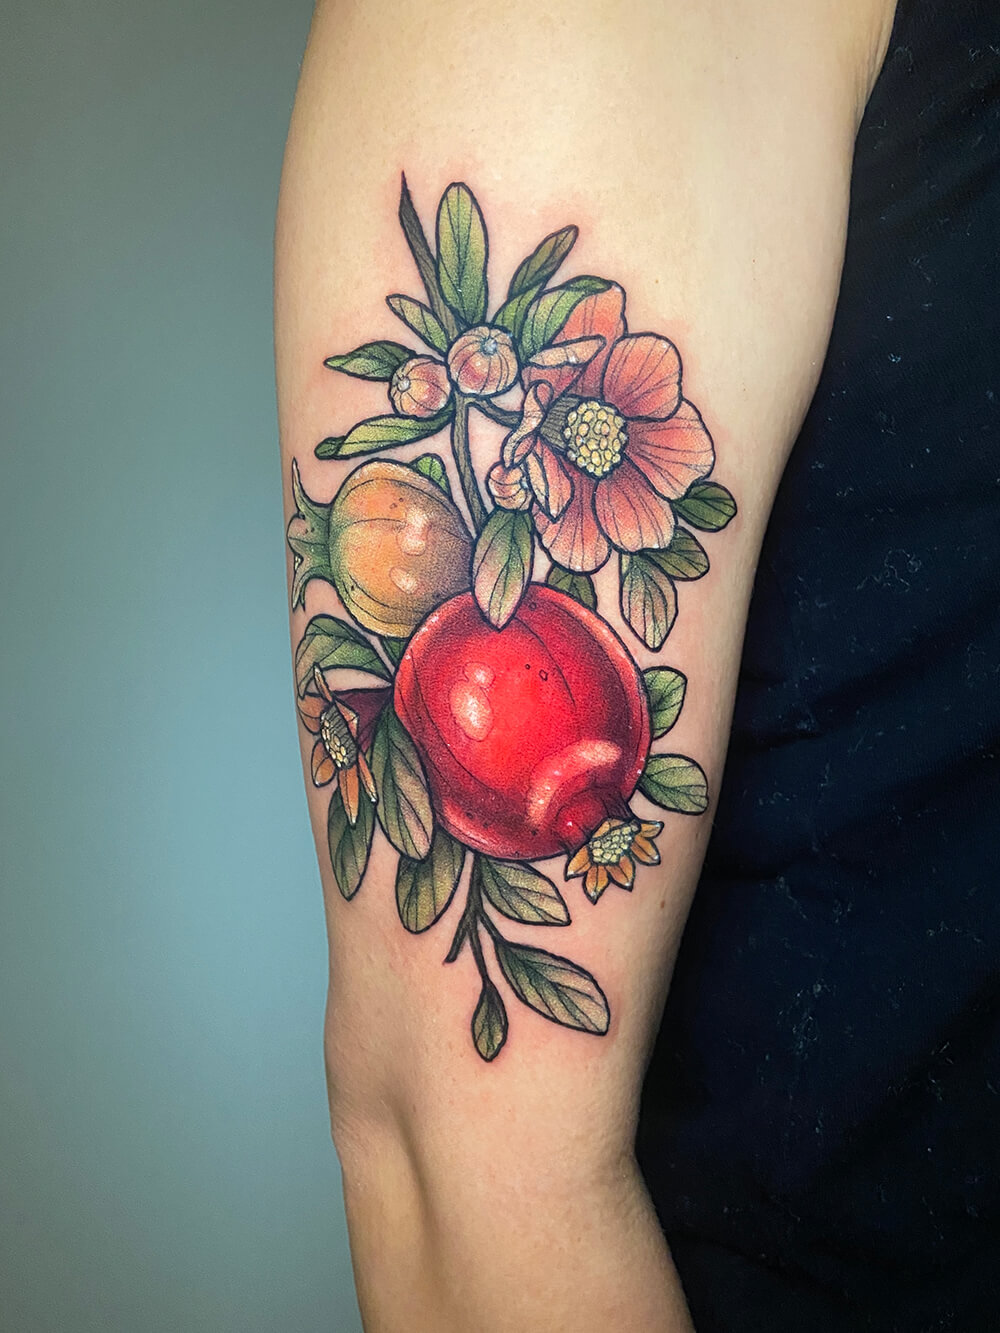 Would You Get a Vegan Tattoo? - Organic Authority